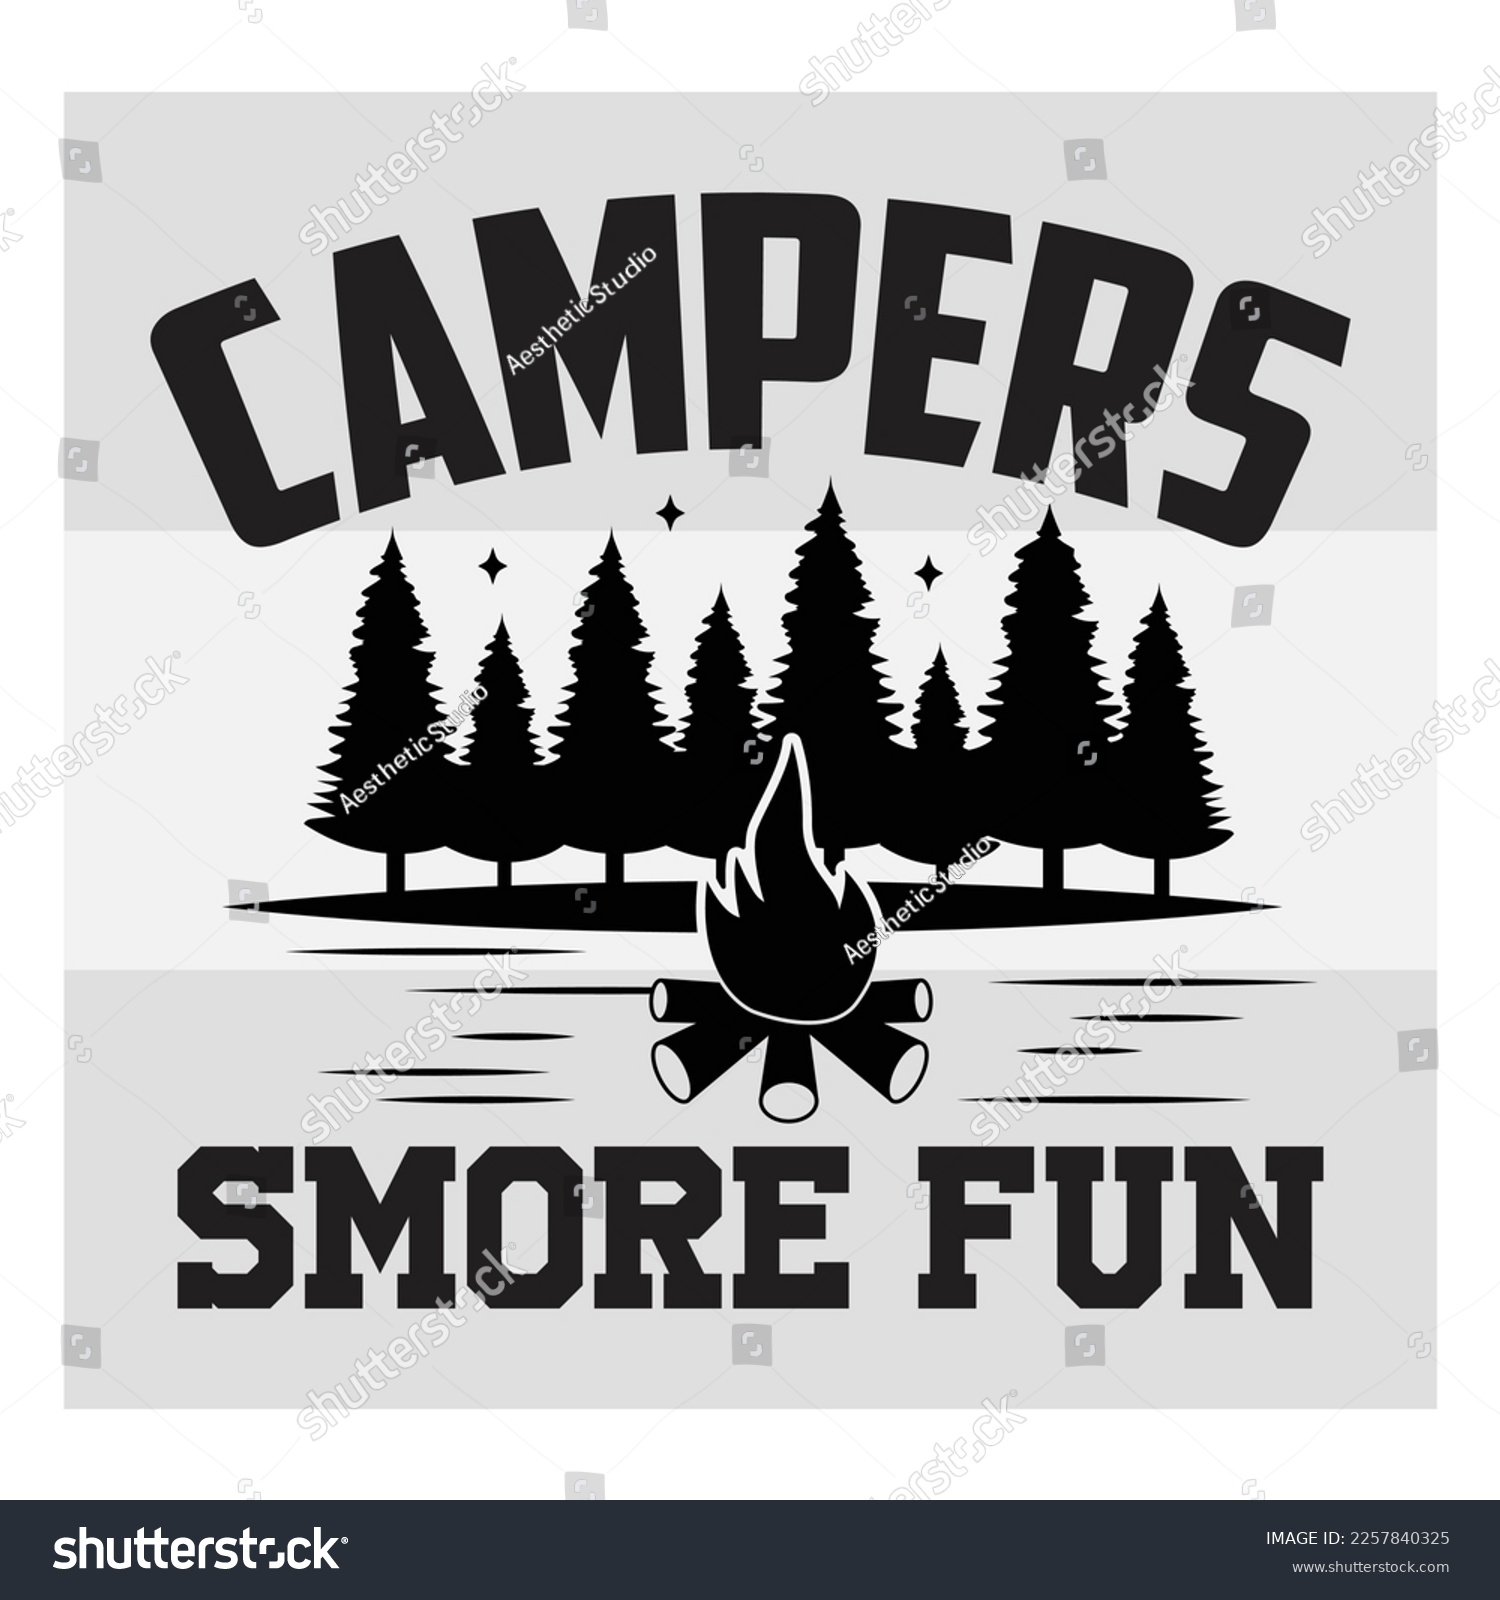 SVG of Campers Have Smore Fun, Camper, Adventure, Camp Life, Camping Svg, Typography, Camping Quotes, Funny Camping, Camping T-shirt Design, SVG, EPS svg